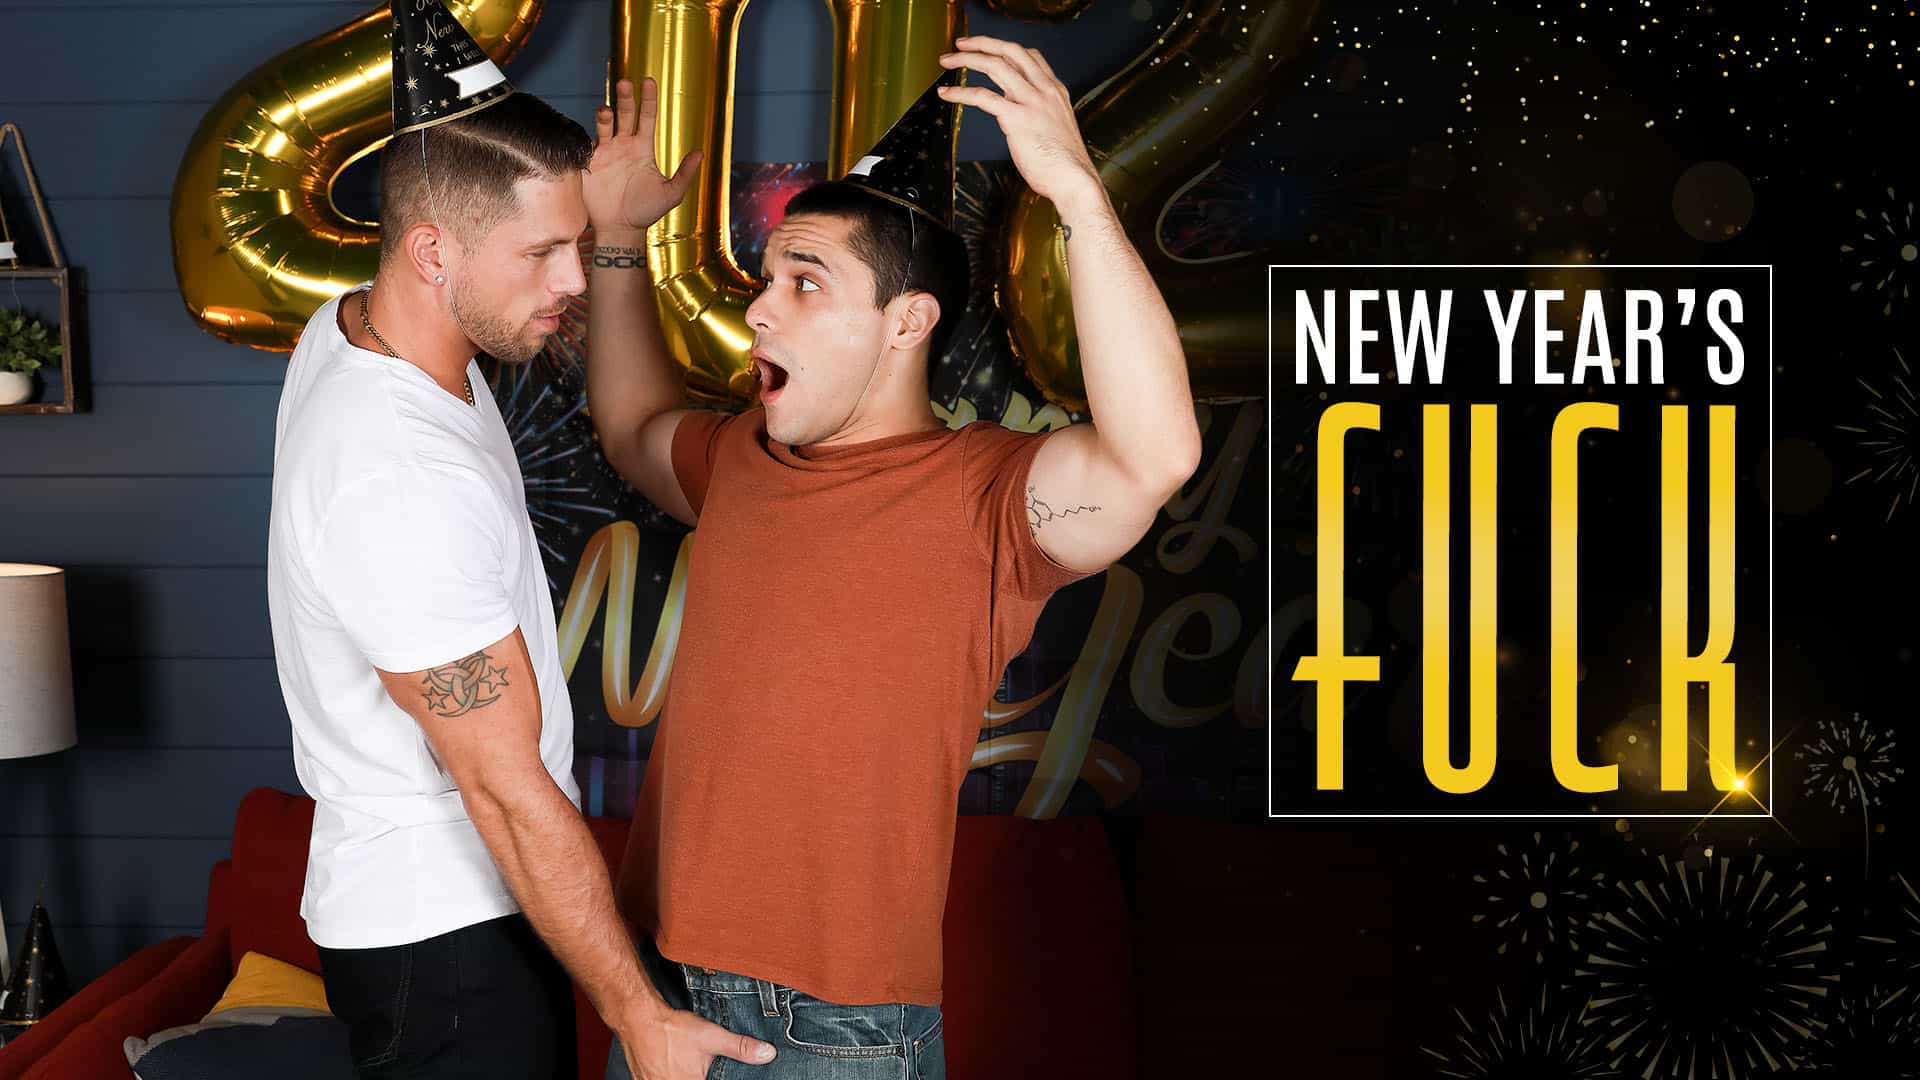 New Year’s Fuck – Roman Todd and Andrew Miller